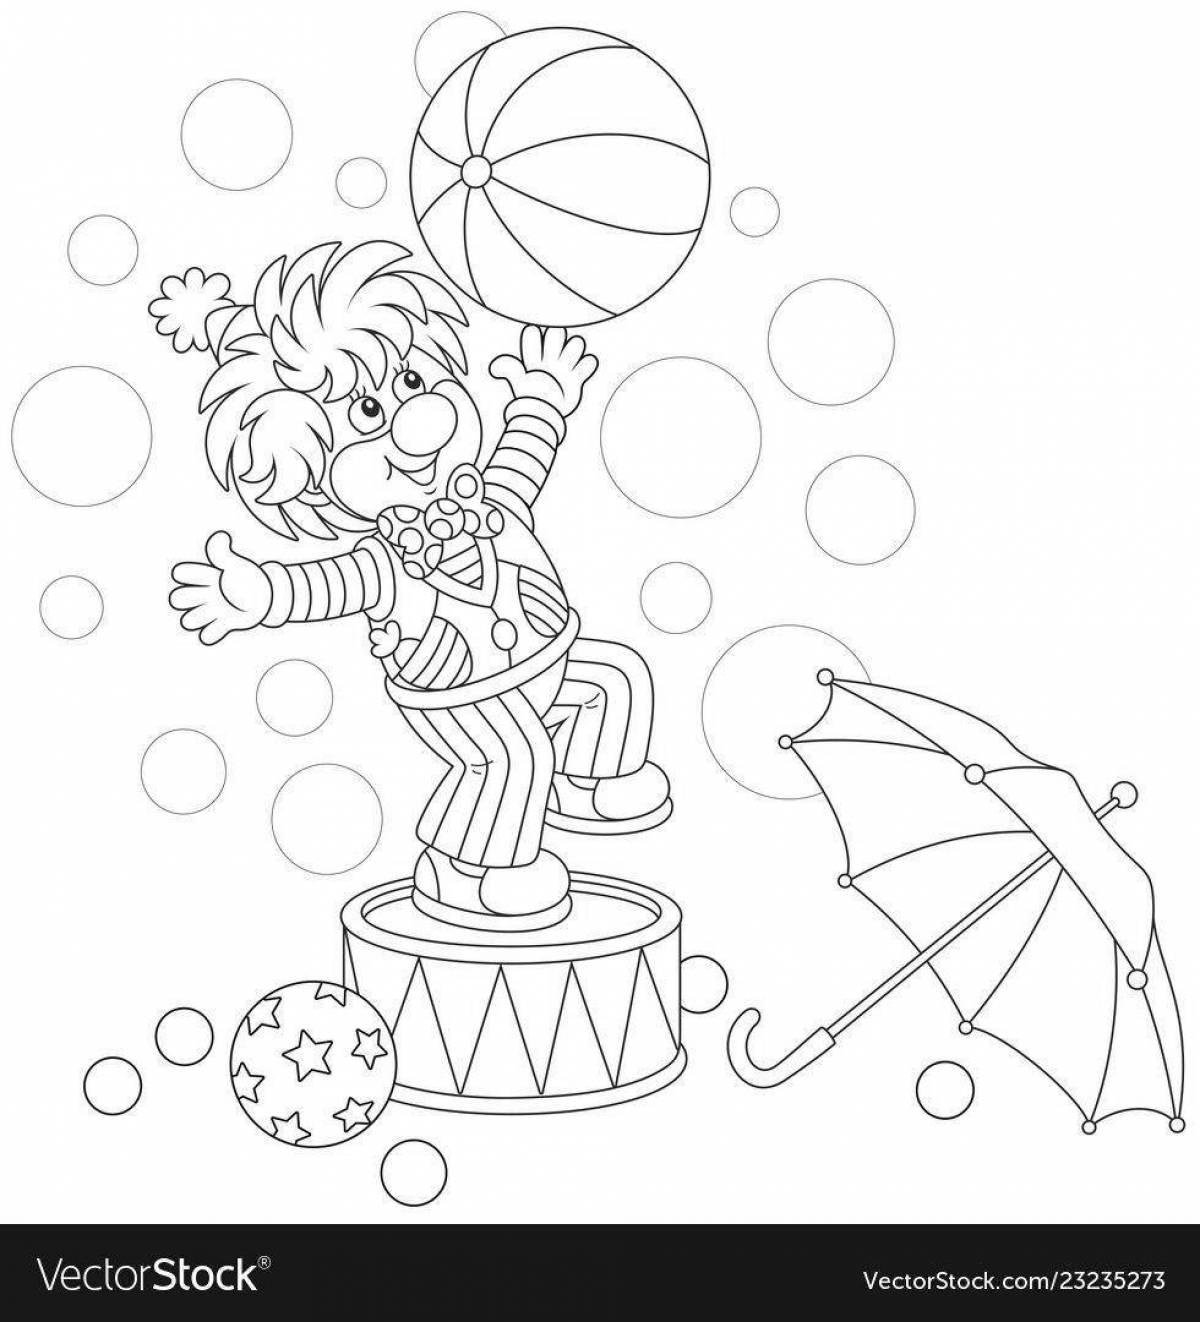 Animated circus kids coloring page